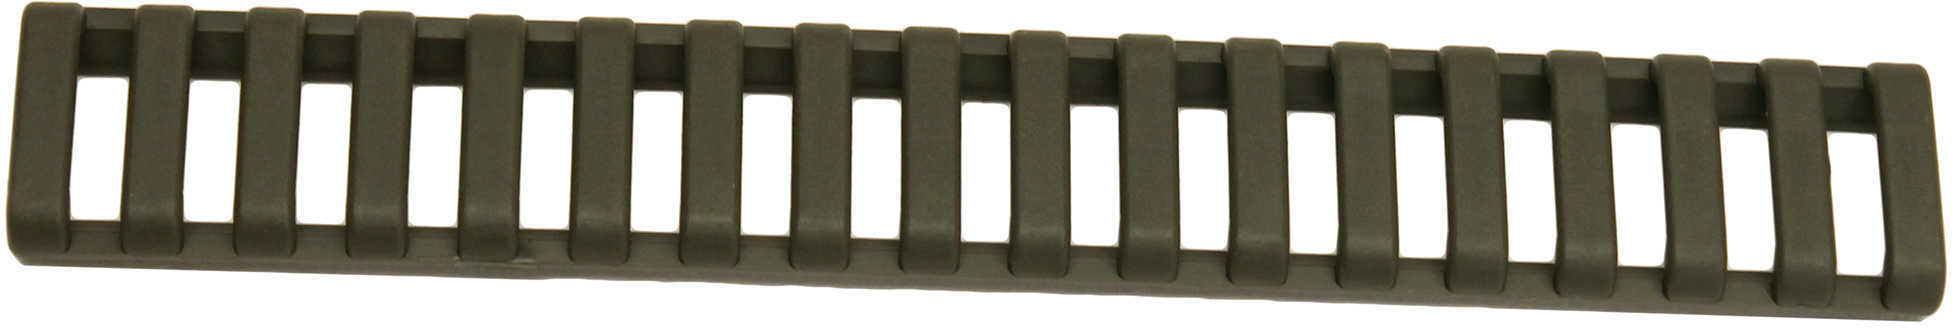 BlackHawk Products Group Low Profile Rail Cover OD Green Rubber Picatinny 18 Slot 71RL00OD